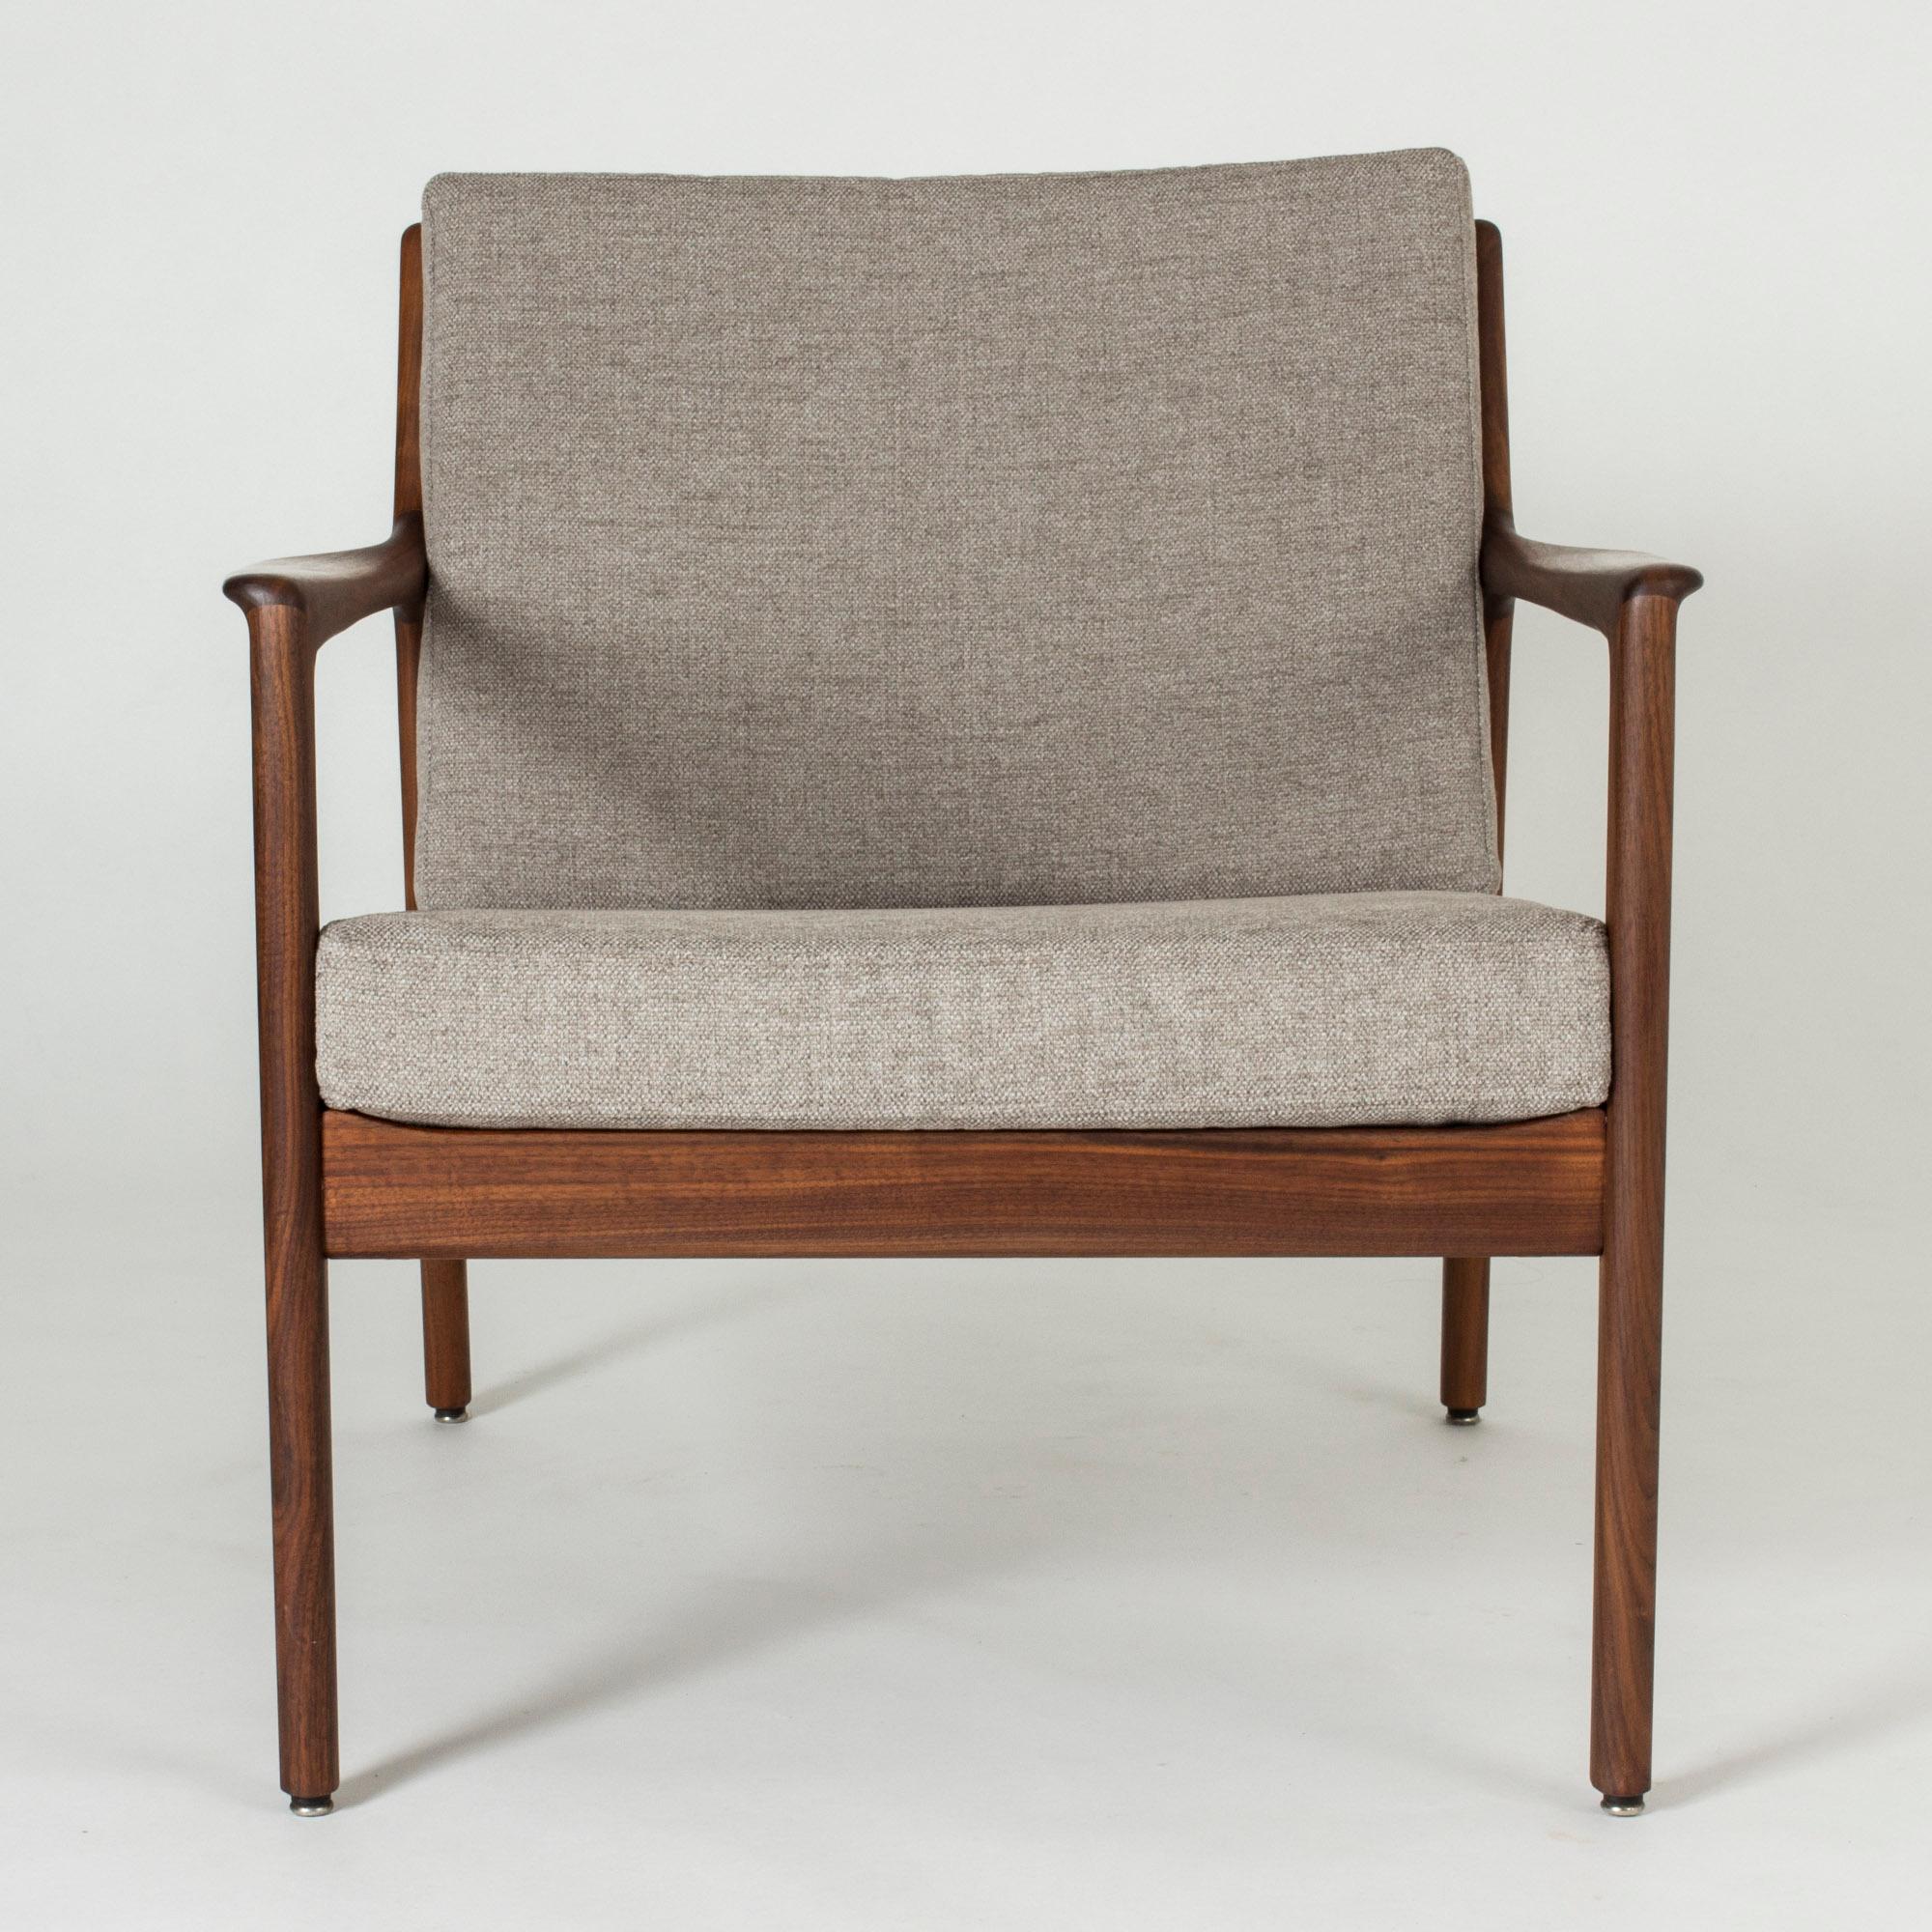 Linen Pair of “USA 75” Teak Lounge Chairs by Folke Ohlsson for DUX, Sweden, 1960s